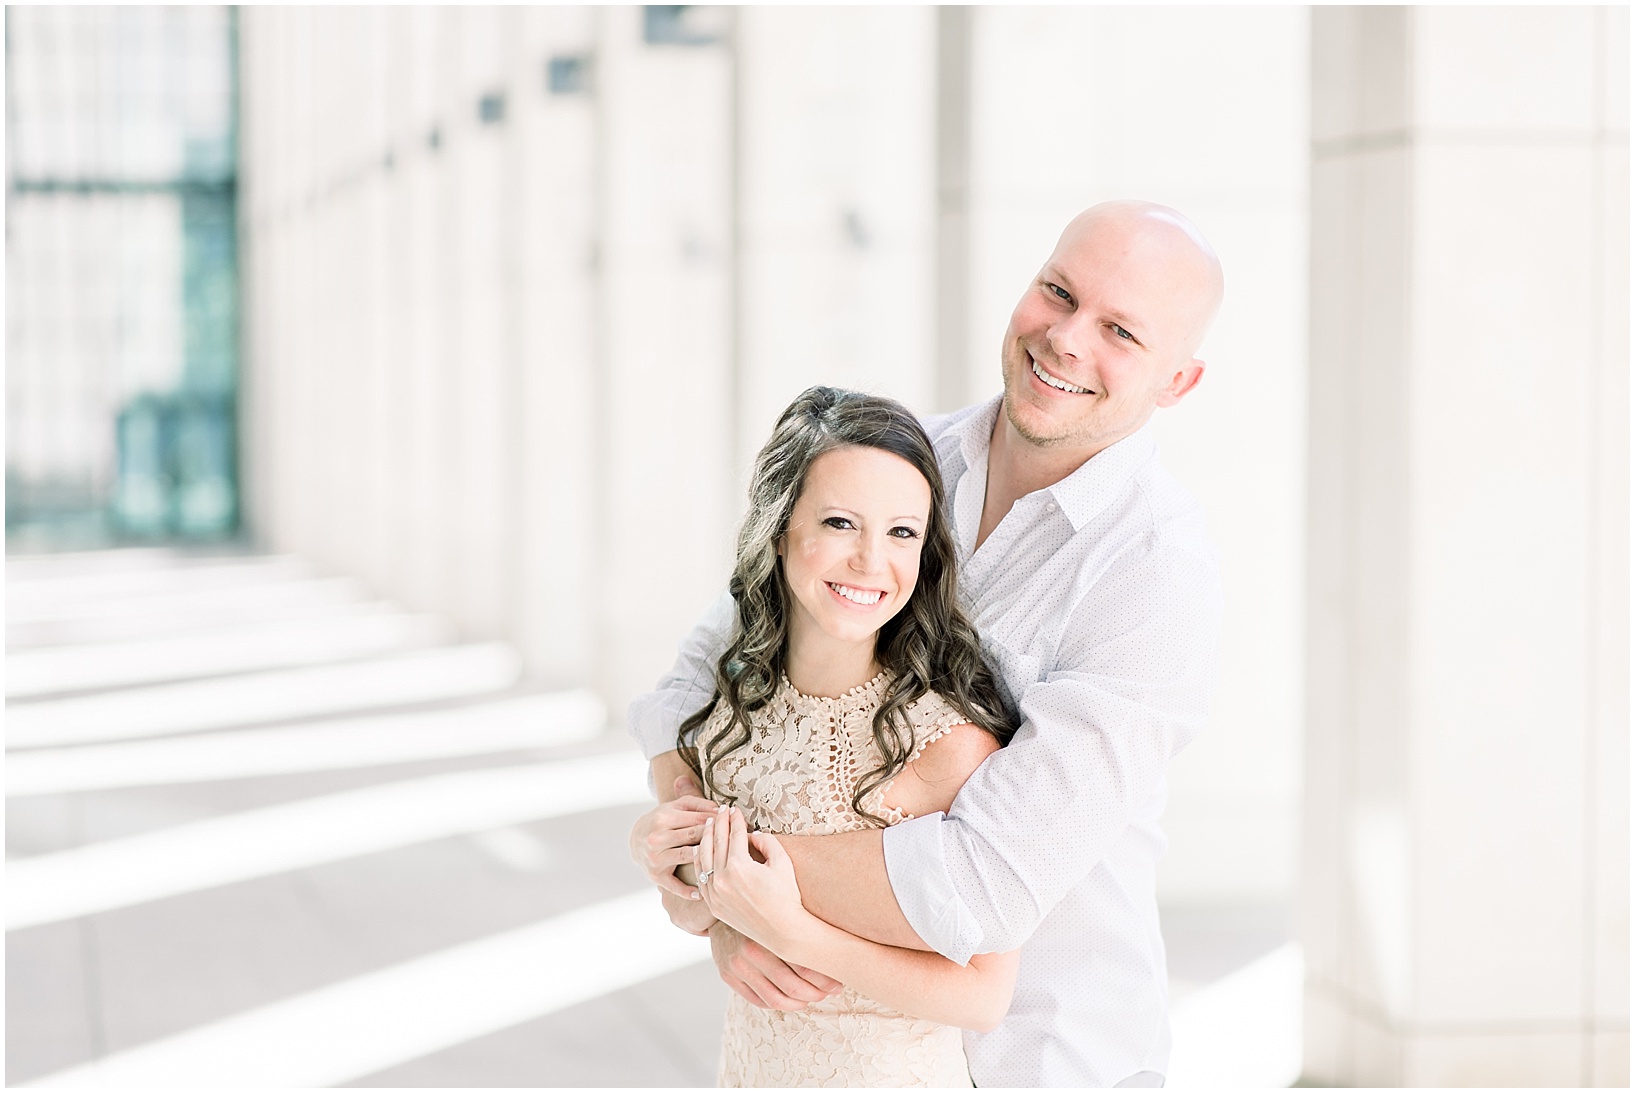 Uptown Charlotte Engagement Session | Katheryn Jeanne Photography